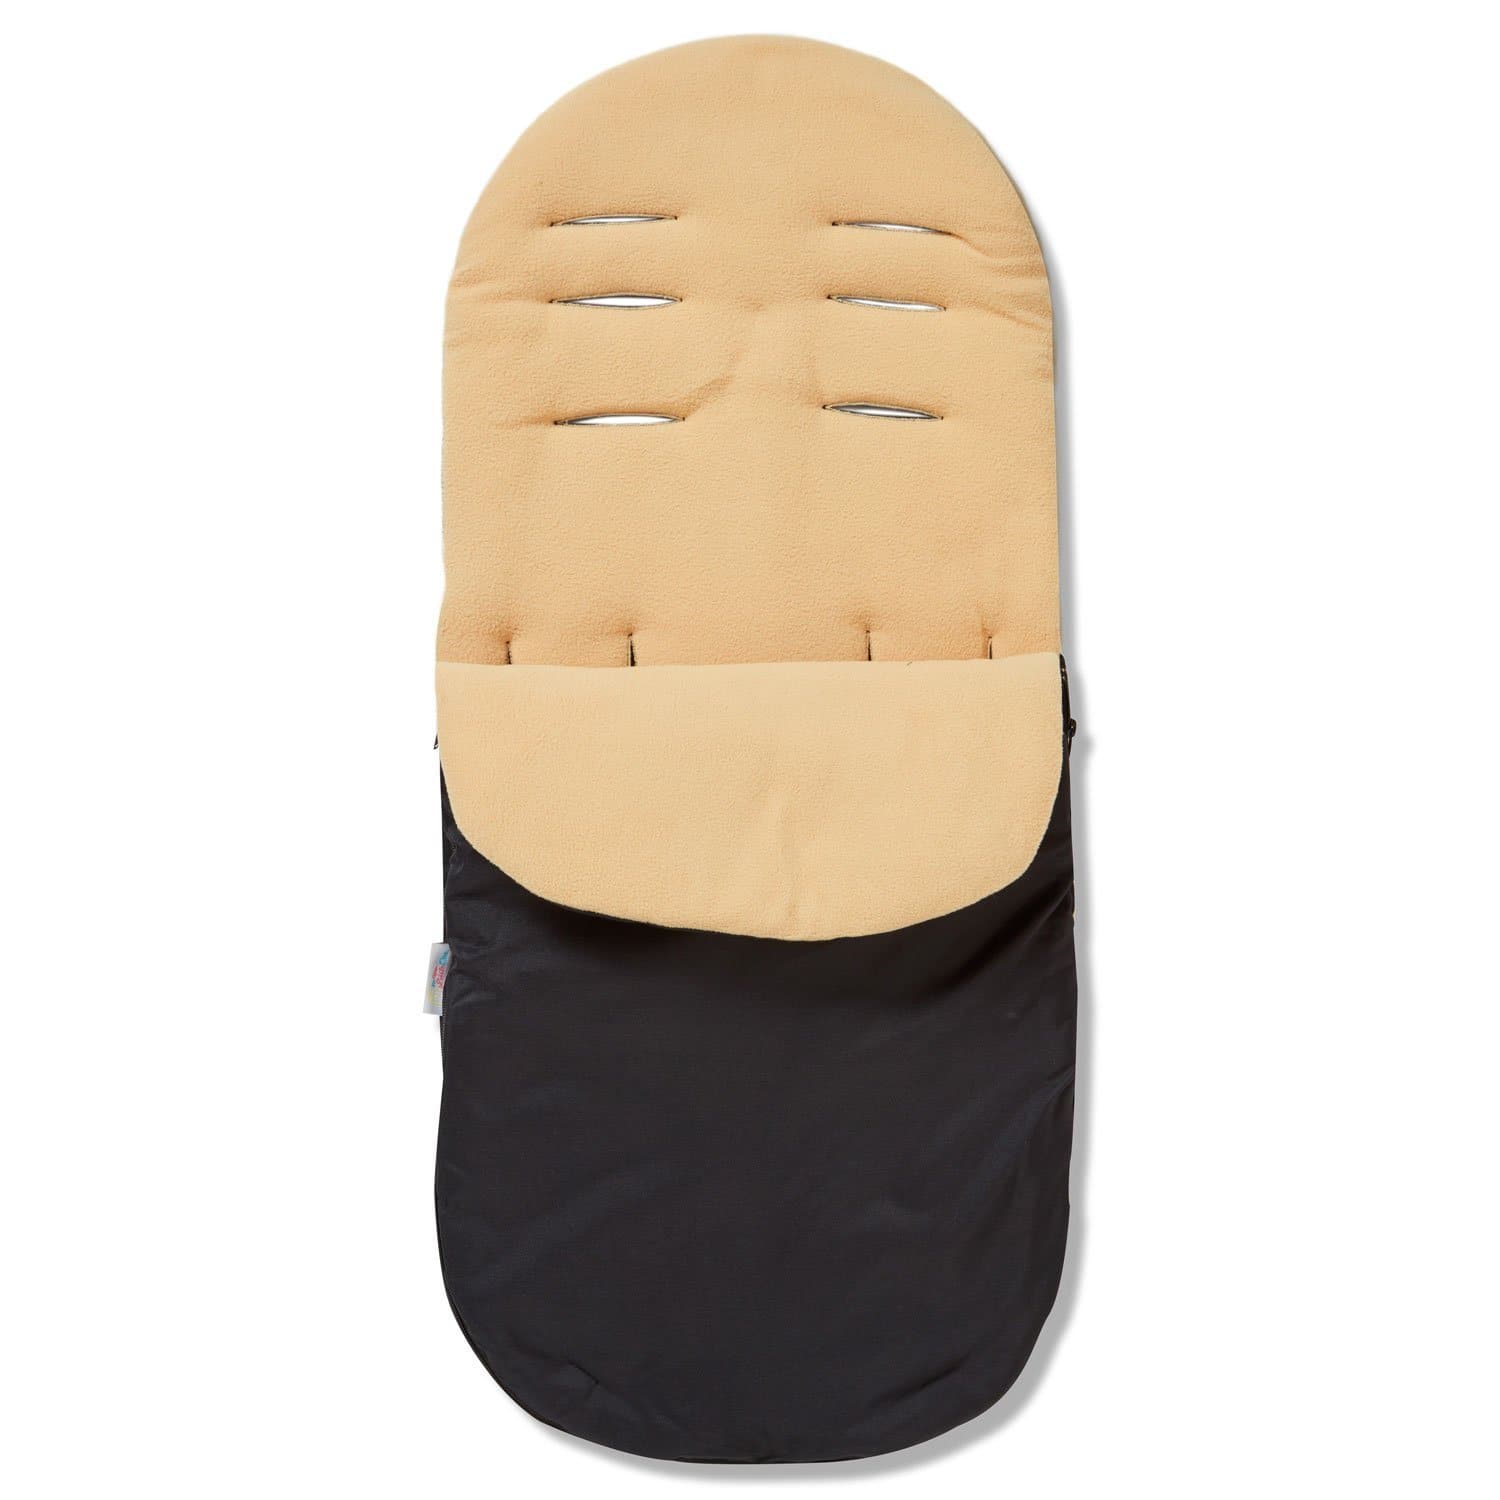 Footmuff / Cosy Toes Compatible with Baby Elegance - Sand / Fits All Models | For Your Little One